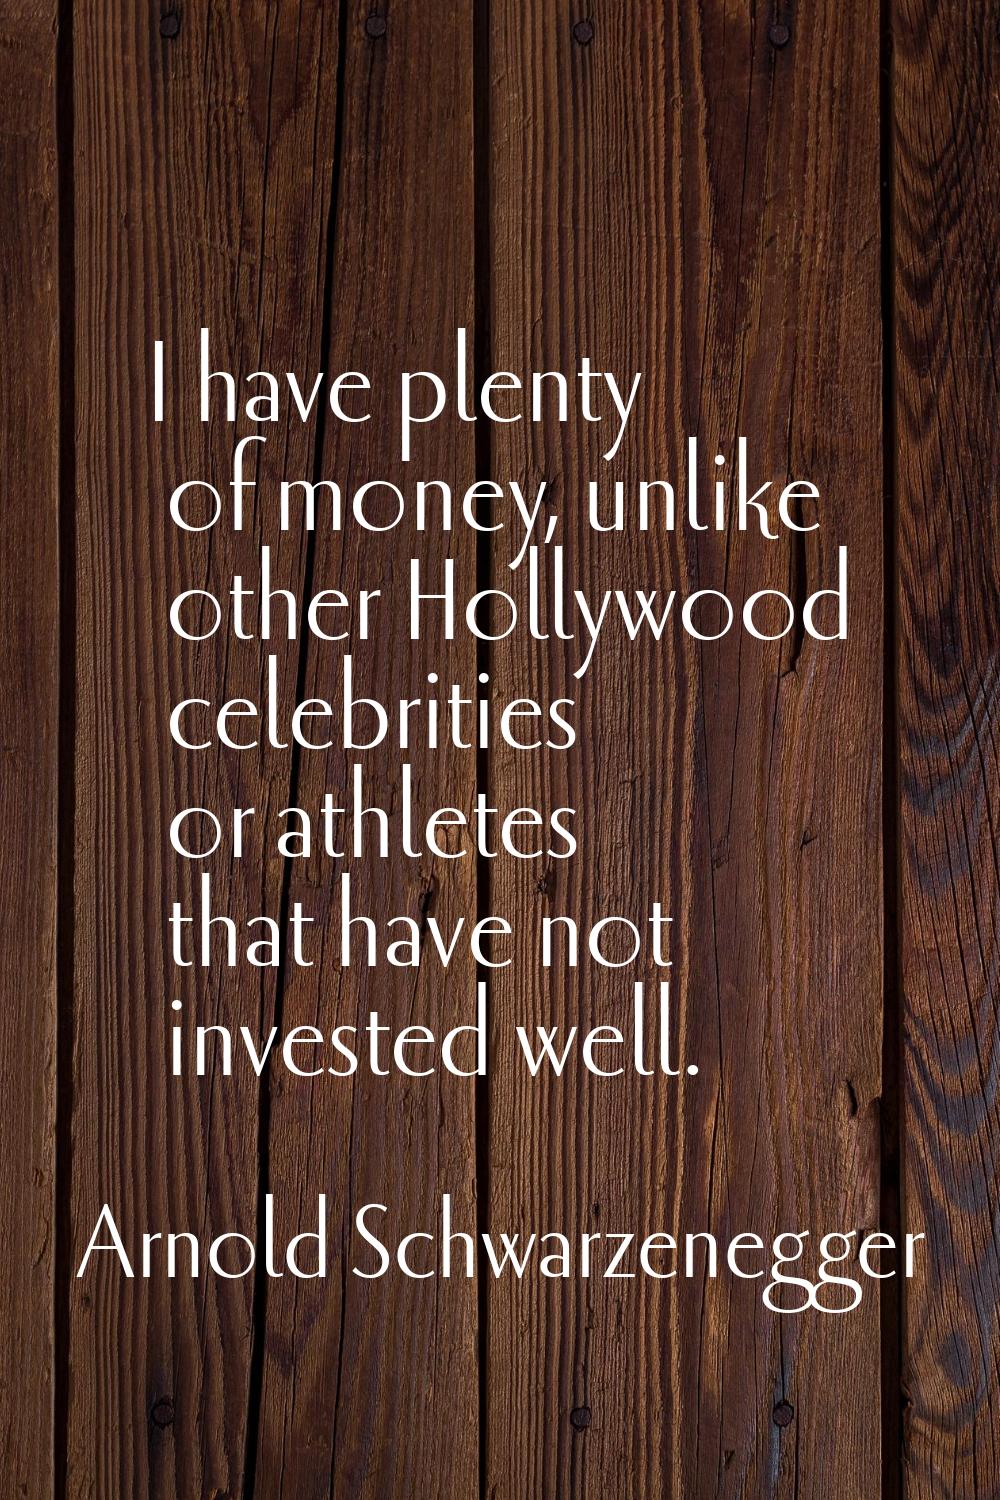 I have plenty of money, unlike other Hollywood celebrities or athletes that have not invested well.